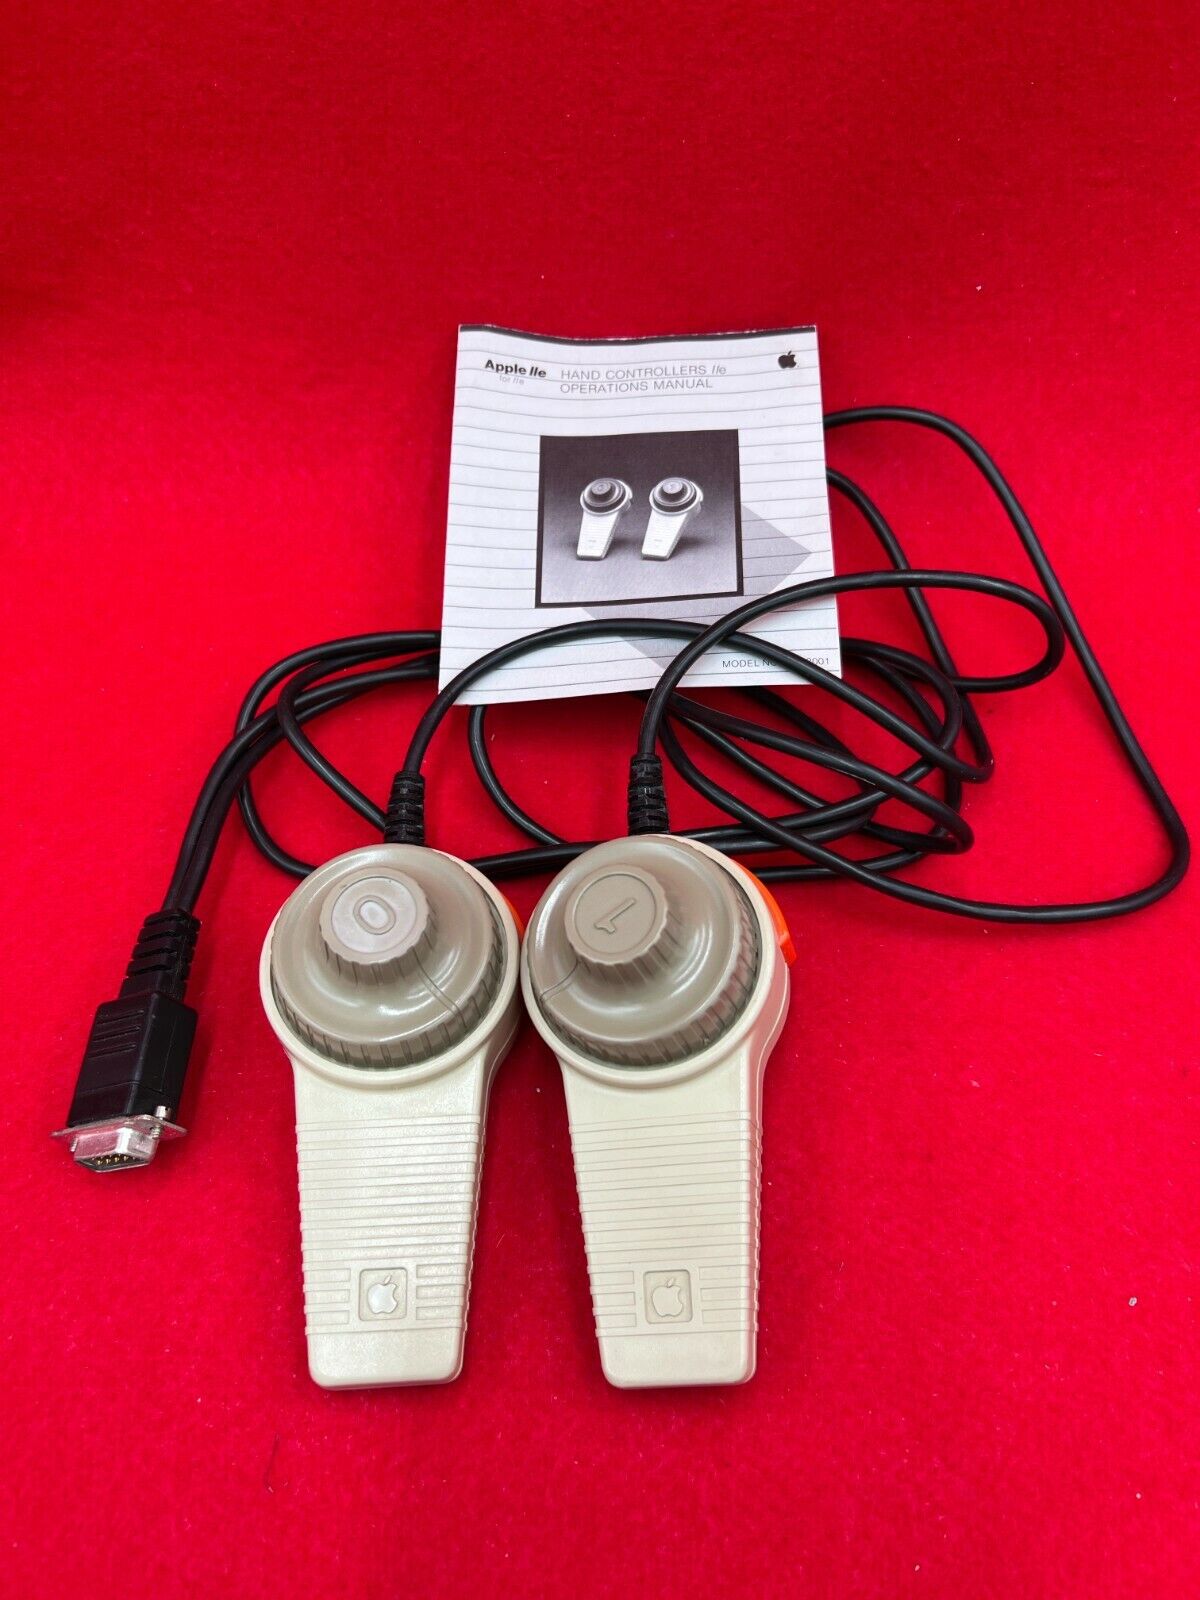 Vintage Orignal Apple Brand Hand Controllers for Apple iie A2M2001 -THEY WORK